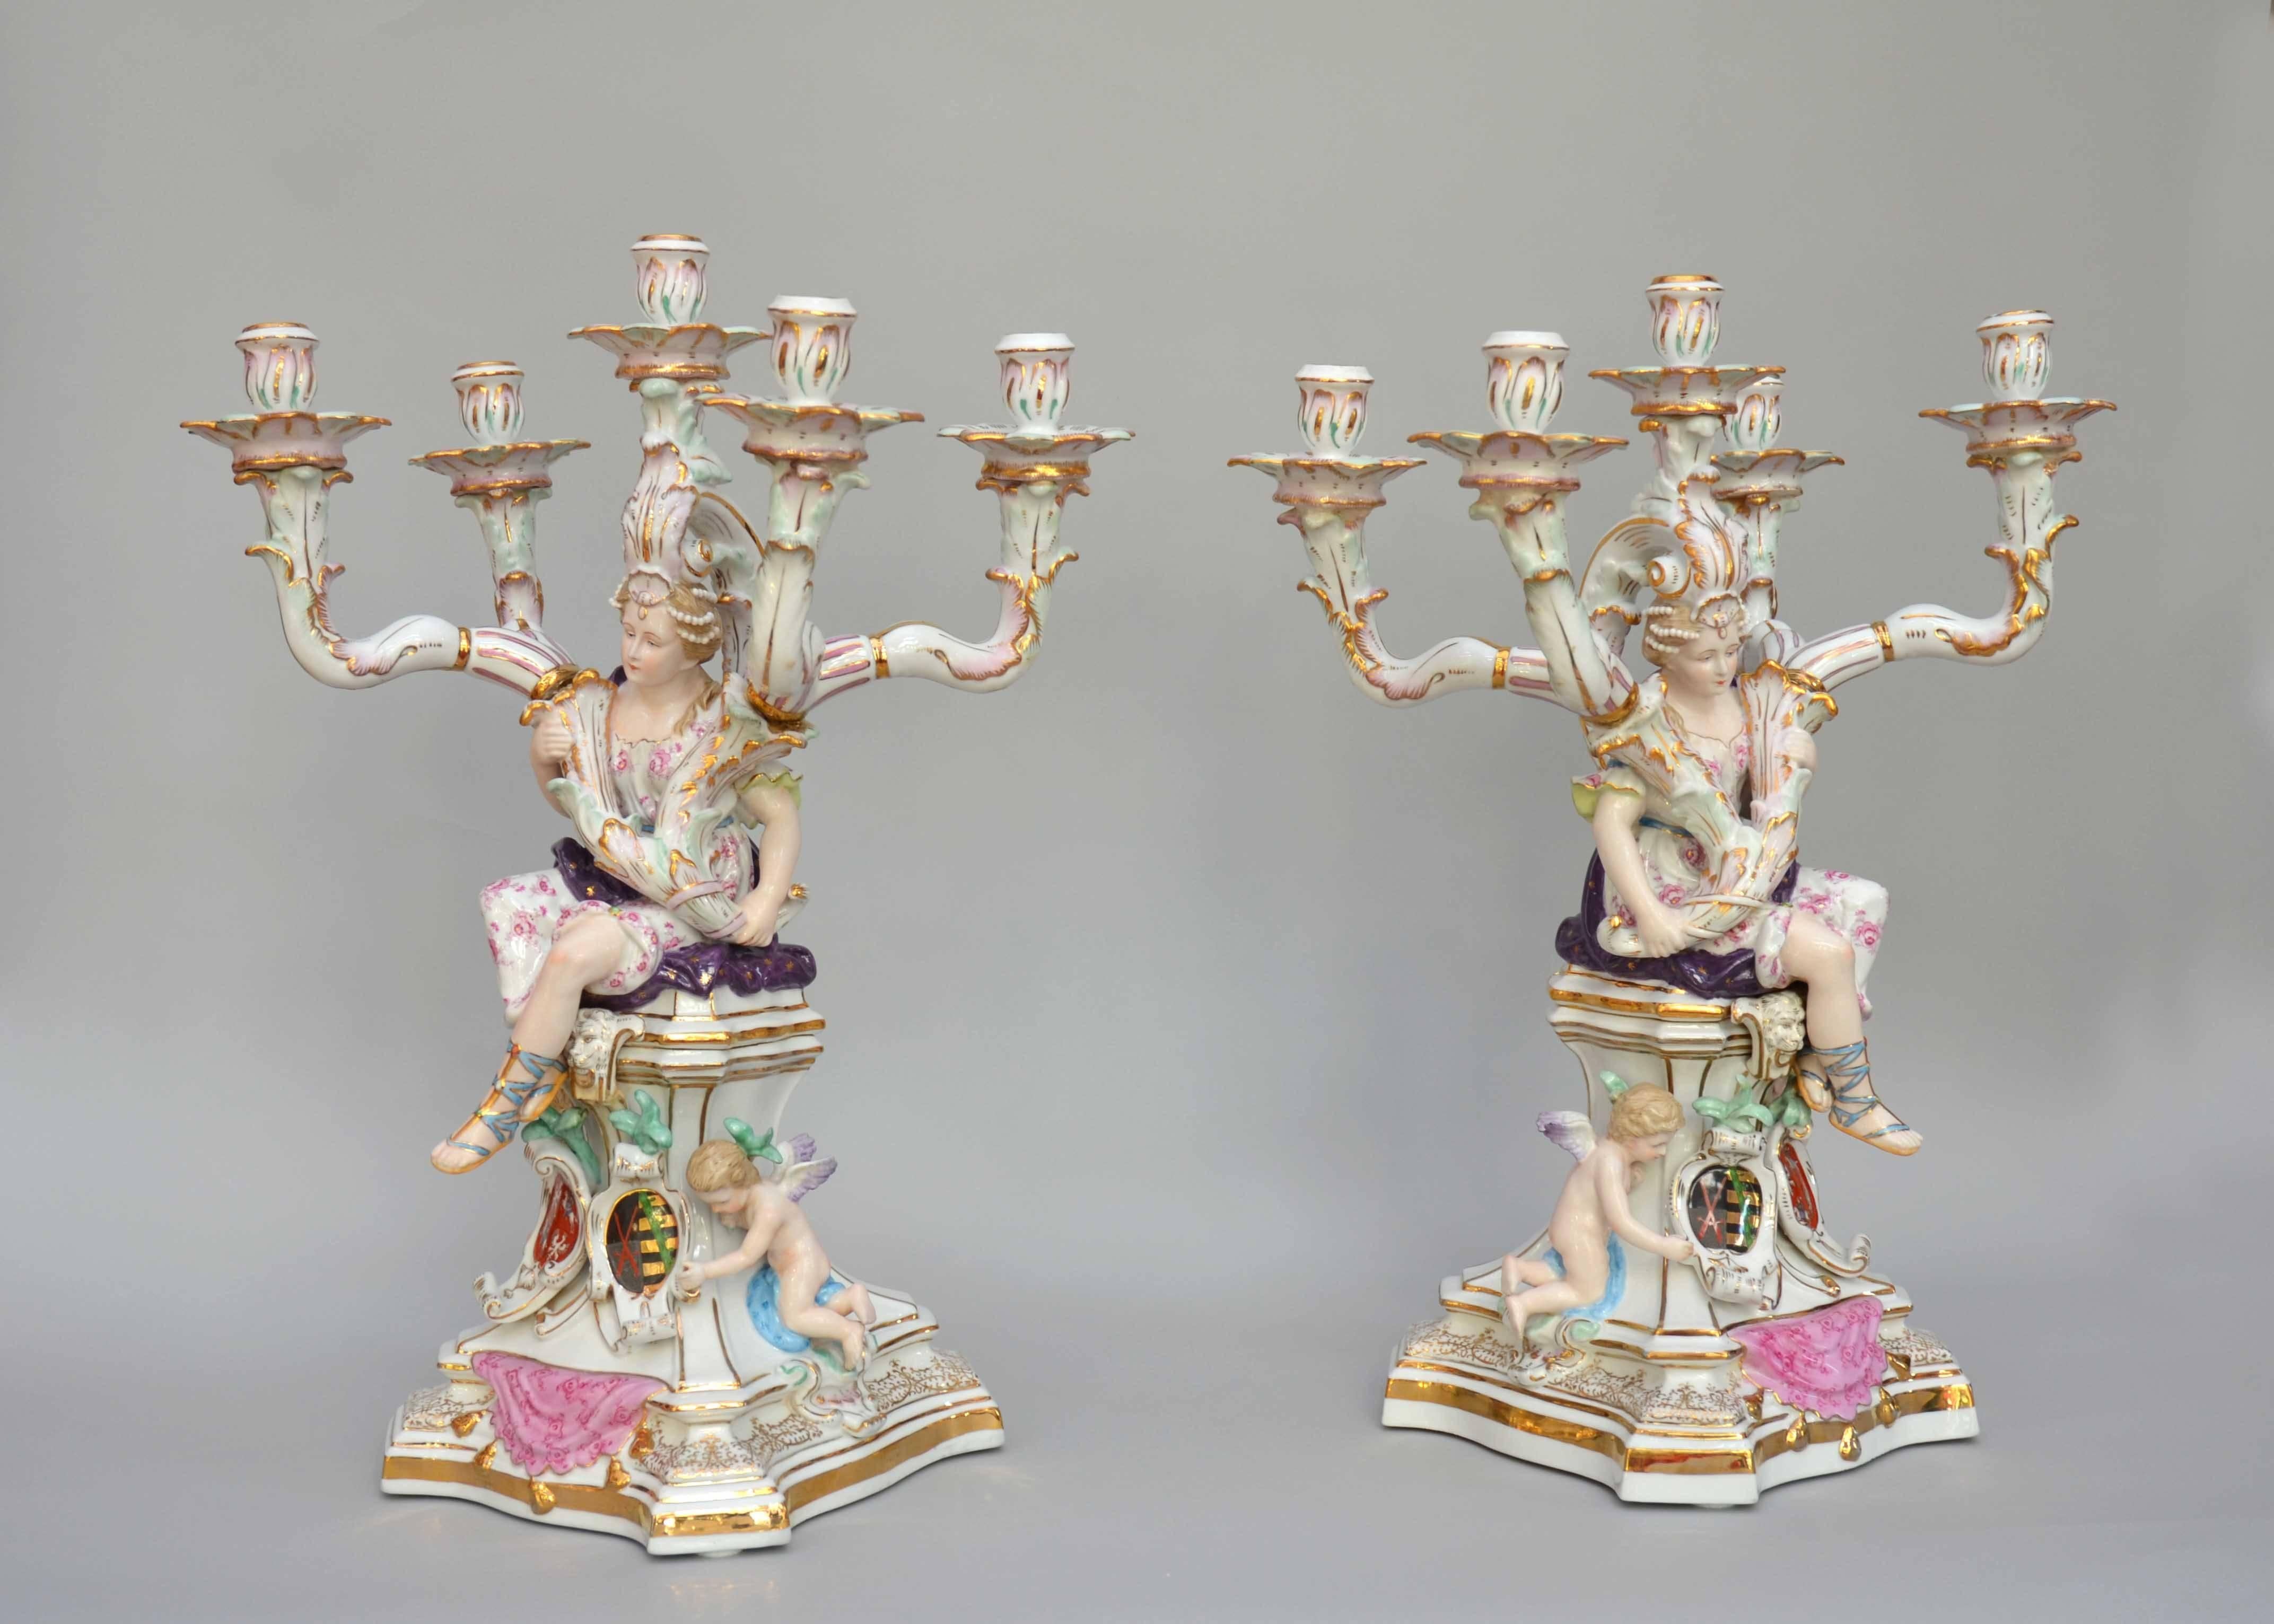 Pair of figural porcelain candlesticks with five branches. An elegant woman is holding the branches, at her feet children near shileds with armorial bearings. After the model of the Meissen manufactory, these are Dresden porcelain. Great condition